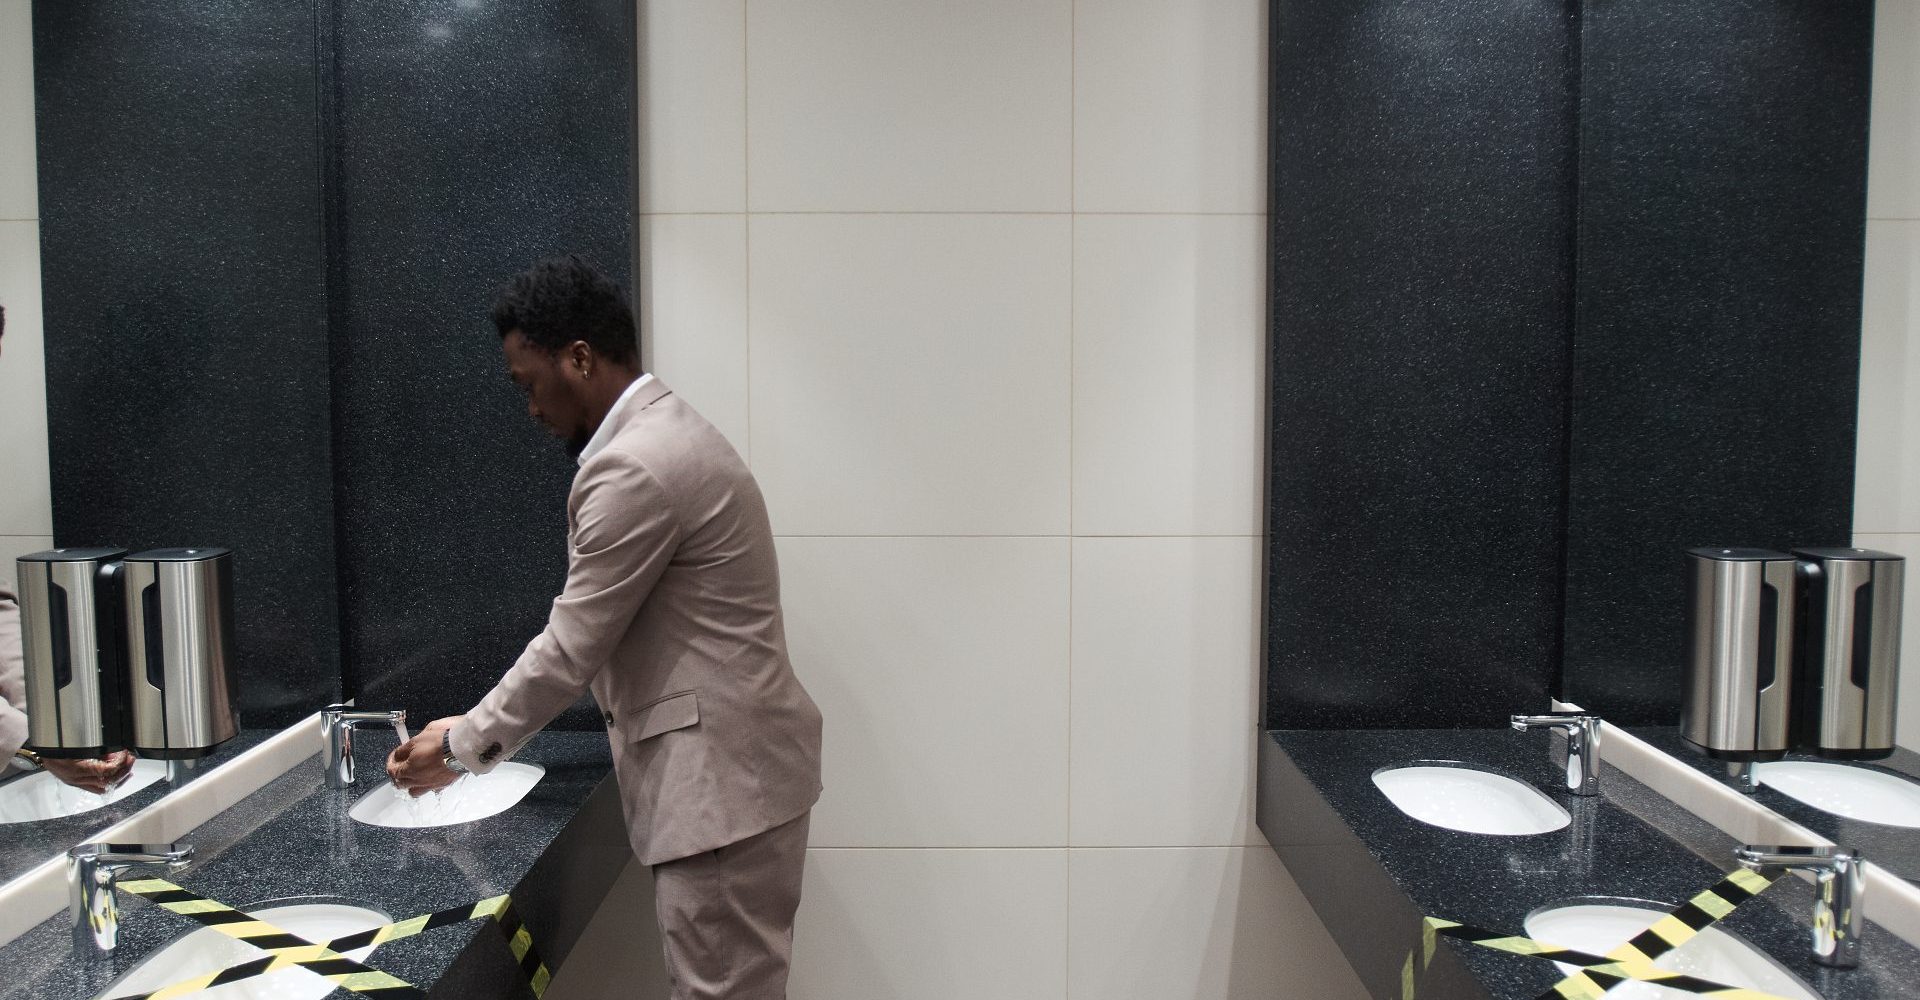 A man washes his hands in a corporate washroom with white sinks and dark walls.